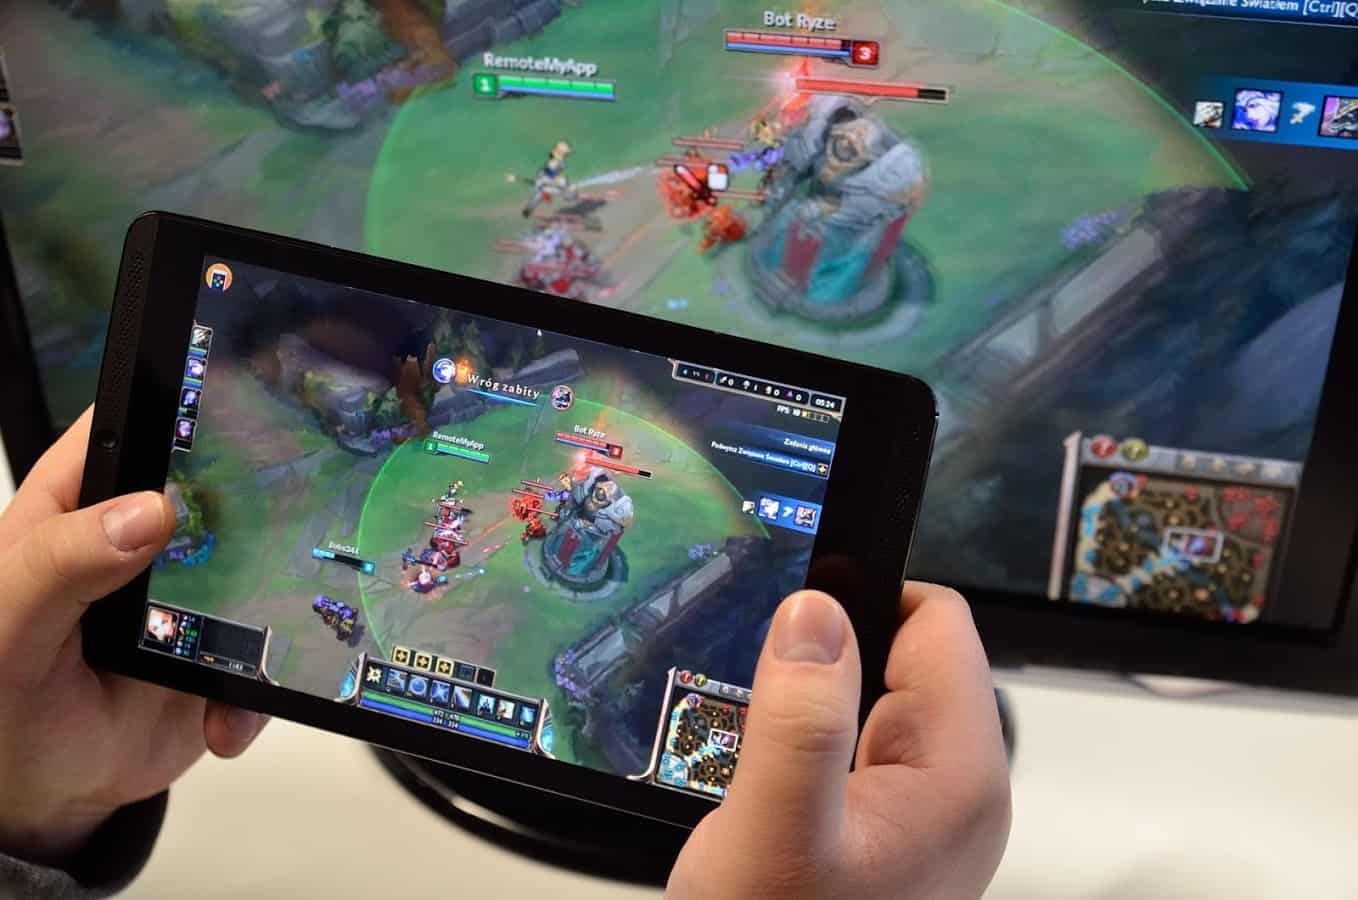 Stream PC Games to Your Android